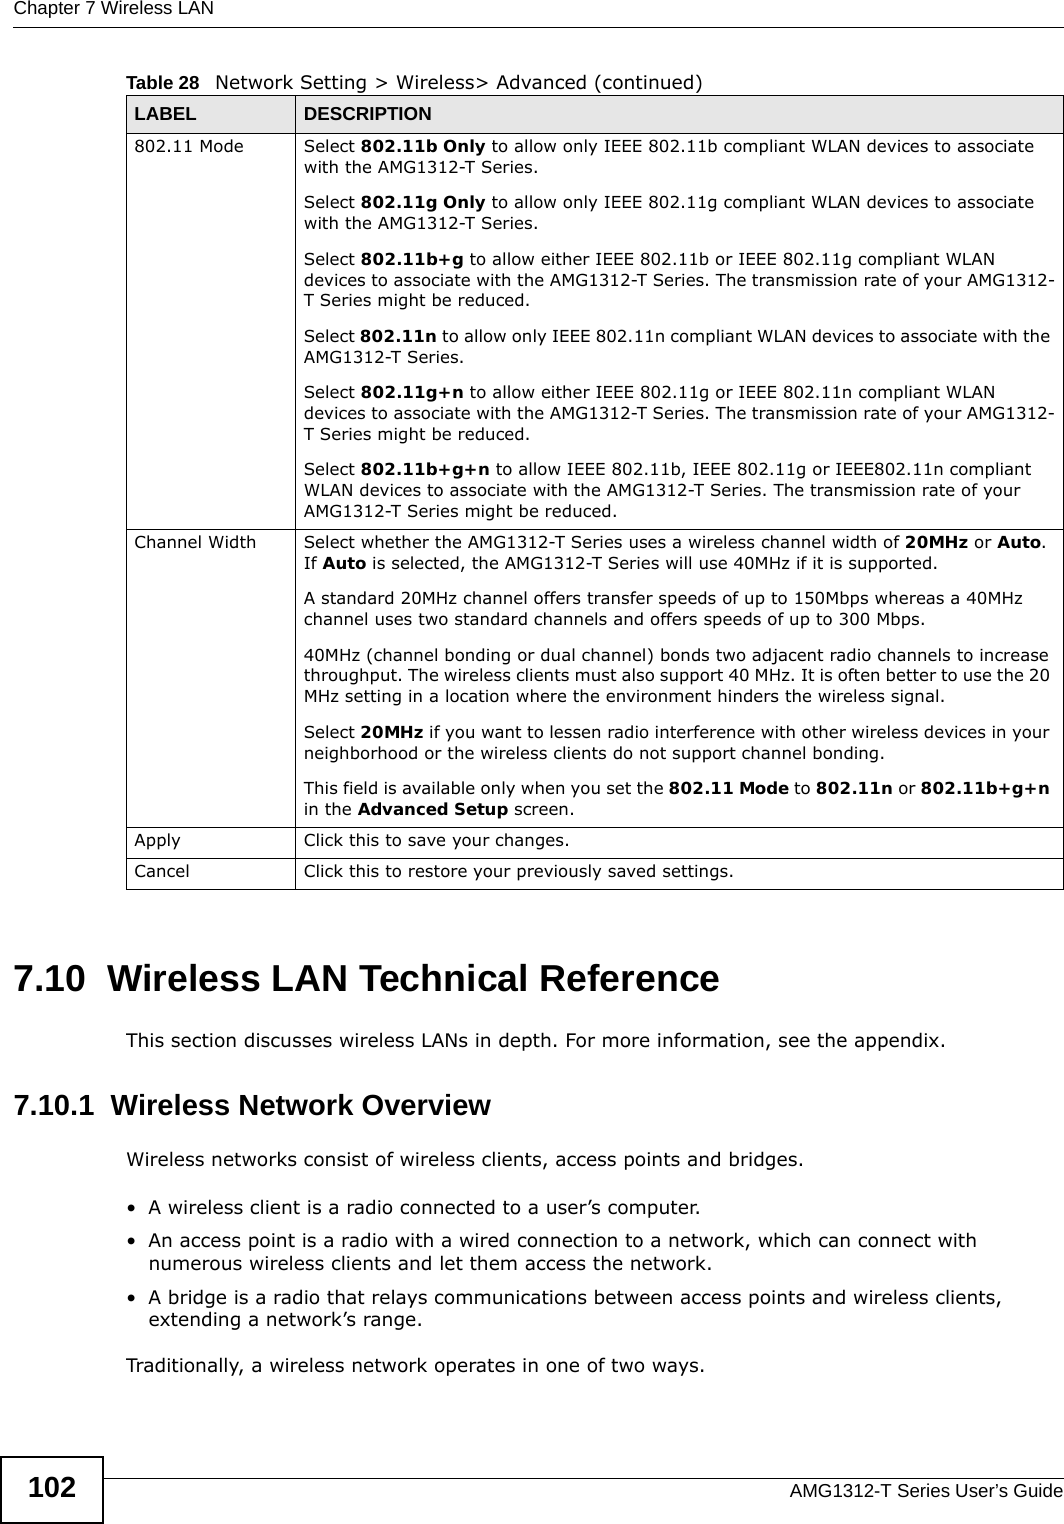 Chapter 7 Wireless LANAMG1312-T Series User’s Guide1027.10  Wireless LAN Technical ReferenceThis section discusses wireless LANs in depth. For more information, see the appendix.7.10.1  Wireless Network OverviewWireless networks consist of wireless clients, access points and bridges. • A wireless client is a radio connected to a user’s computer. • An access point is a radio with a wired connection to a network, which can connect with numerous wireless clients and let them access the network. • A bridge is a radio that relays communications between access points and wireless clients, extending a network’s range. Traditionally, a wireless network operates in one of two ways.802.11 Mode Select 802.11b Only to allow only IEEE 802.11b compliant WLAN devices to associate with the AMG1312-T Series.Select 802.11g Only to allow only IEEE 802.11g compliant WLAN devices to associate with the AMG1312-T Series.Select 802.11b+g to allow either IEEE 802.11b or IEEE 802.11g compliant WLAN devices to associate with the AMG1312-T Series. The transmission rate of your AMG1312-T Series might be reduced.Select 802.11n to allow only IEEE 802.11n compliant WLAN devices to associate with the AMG1312-T Series.Select 802.11g+n to allow either IEEE 802.11g or IEEE 802.11n compliant WLAN devices to associate with the AMG1312-T Series. The transmission rate of your AMG1312-T Series might be reduced.Select 802.11b+g+n to allow IEEE 802.11b, IEEE 802.11g or IEEE802.11n compliant WLAN devices to associate with the AMG1312-T Series. The transmission rate of your AMG1312-T Series might be reduced.Channel Width Select whether the AMG1312-T Series uses a wireless channel width of 20MHz or Auto. If Auto is selected, the AMG1312-T Series will use 40MHz if it is supported.A standard 20MHz channel offers transfer speeds of up to 150Mbps whereas a 40MHz channel uses two standard channels and offers speeds of up to 300 Mbps. 40MHz (channel bonding or dual channel) bonds two adjacent radio channels to increase throughput. The wireless clients must also support 40 MHz. It is often better to use the 20 MHz setting in a location where the environment hinders the wireless signal. Select 20MHz if you want to lessen radio interference with other wireless devices in your neighborhood or the wireless clients do not support channel bonding.This field is available only when you set the 802.11 Mode to 802.11n or 802.11b+g+n in the Advanced Setup screen.Apply Click this to save your changes.Cancel Click this to restore your previously saved settings.Table 28   Network Setting &gt; Wireless&gt; Advanced (continued)LABEL DESCRIPTION